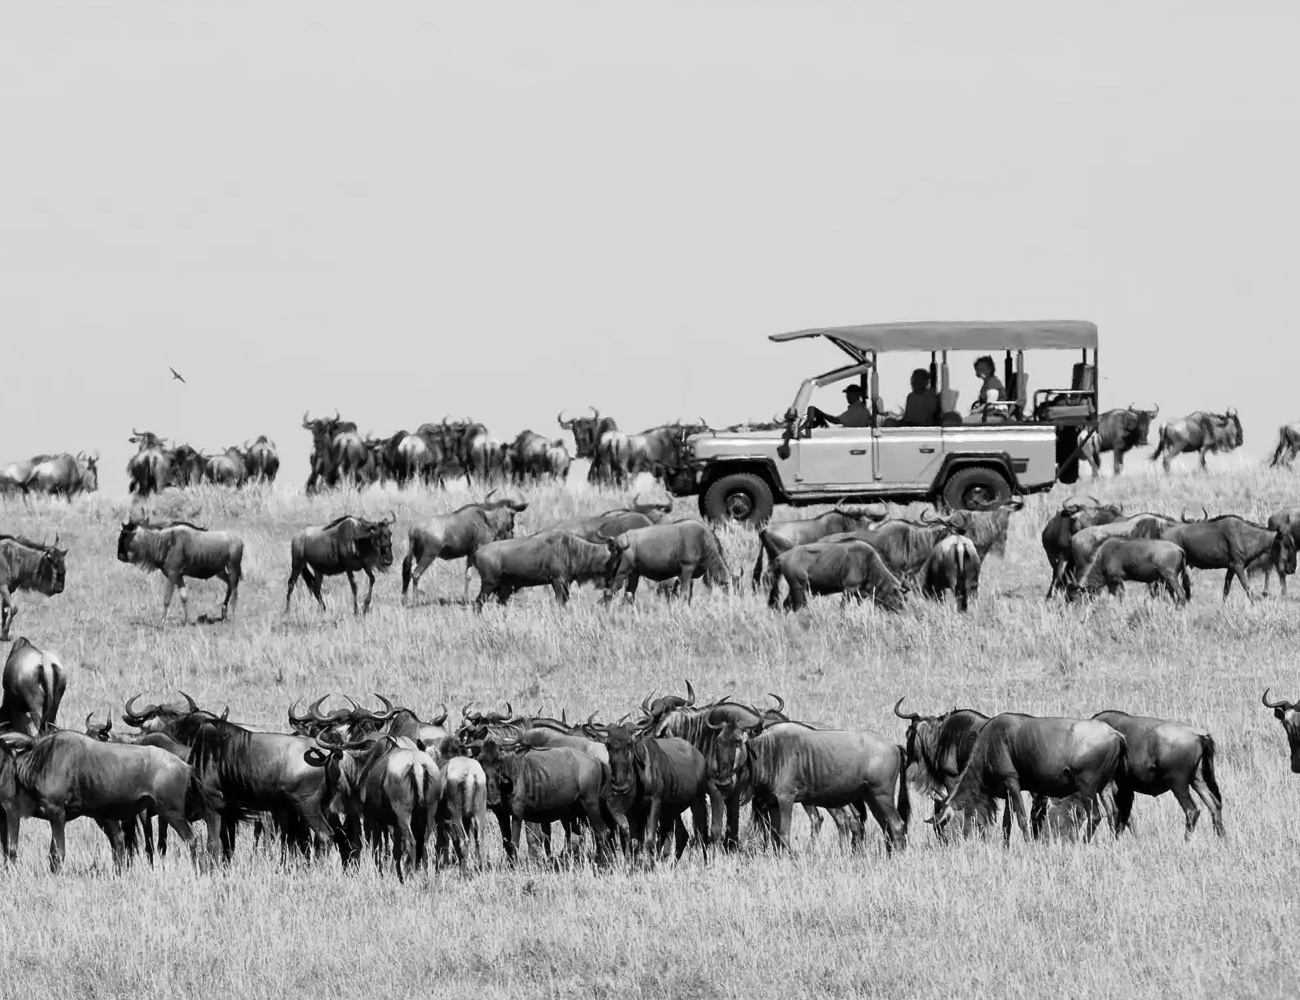 Wildebeest at The Great Migration in Tanzania